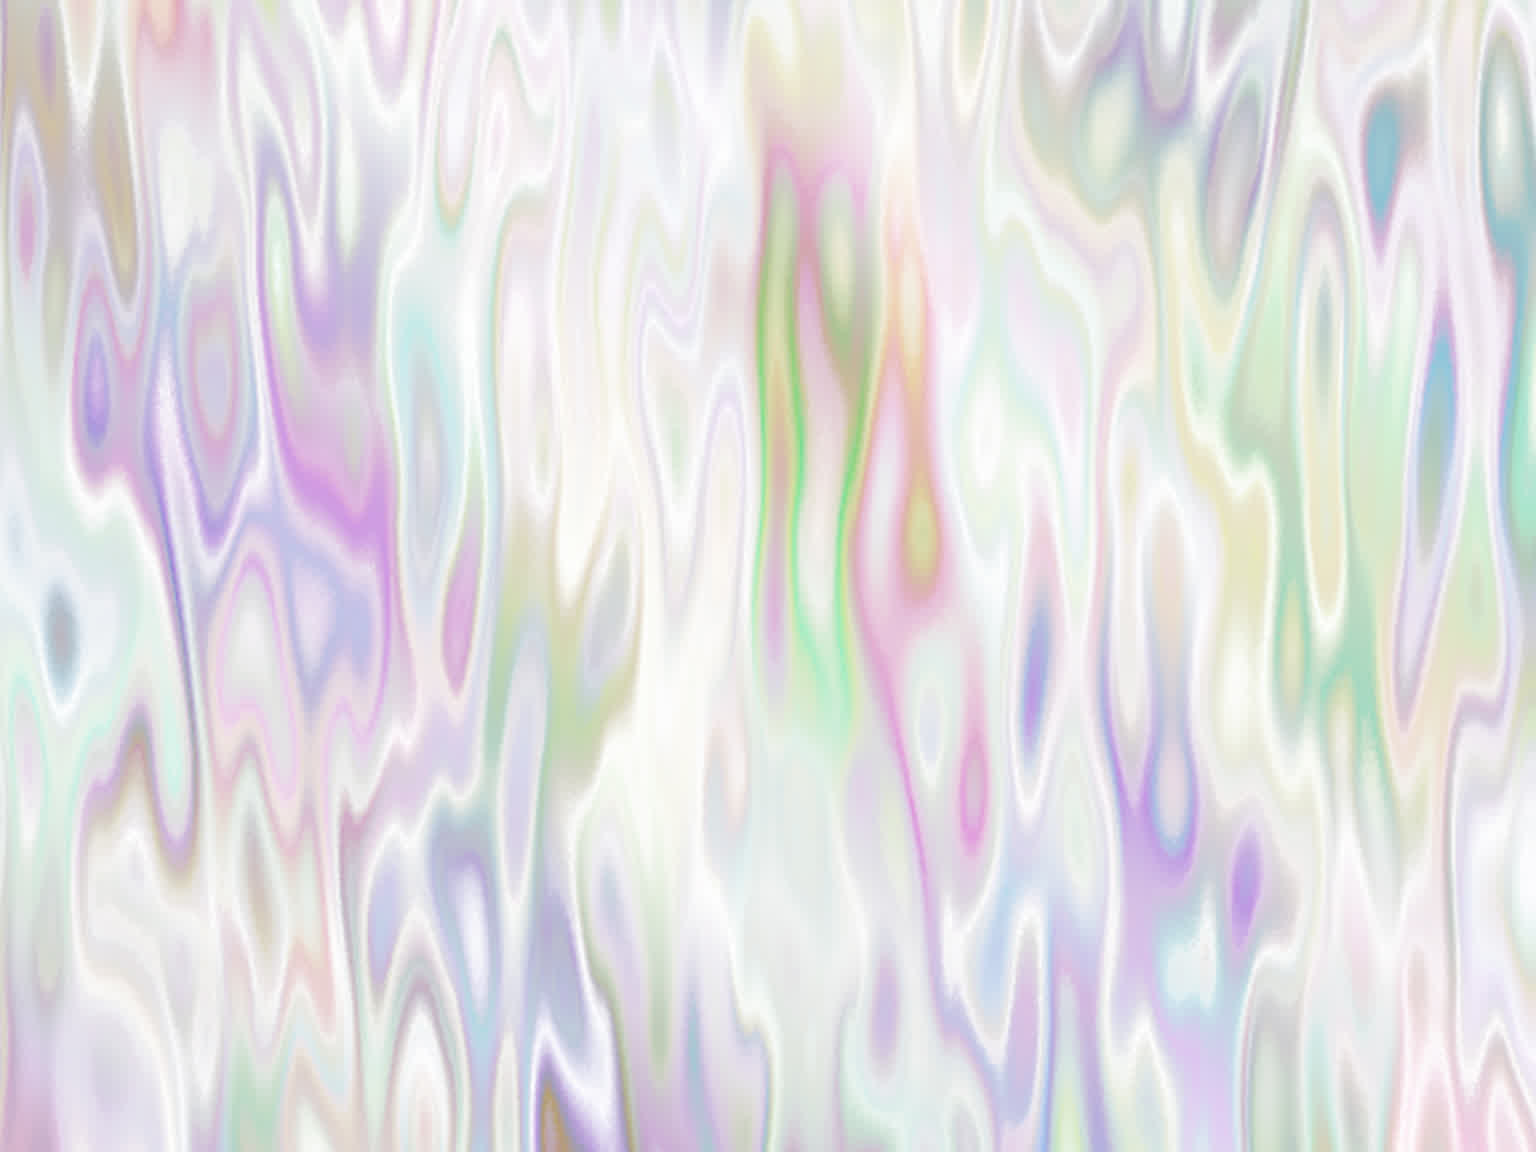 Wavy marbled texture, made using SVG filter primitives